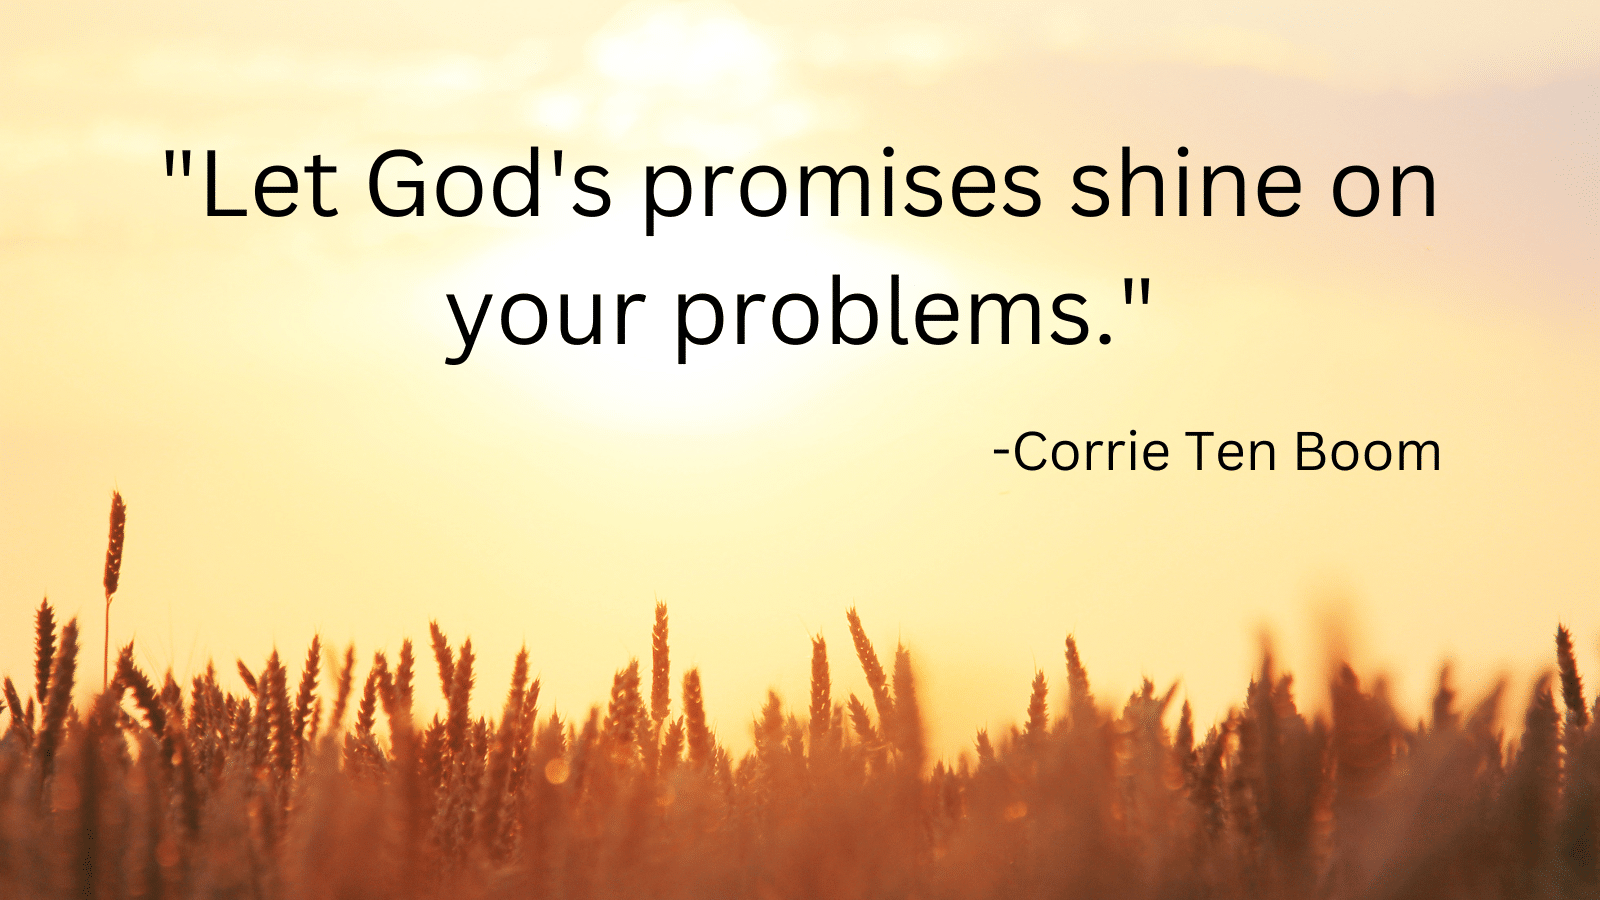 Wheat field at sunset with Corrie Ten Boom quote